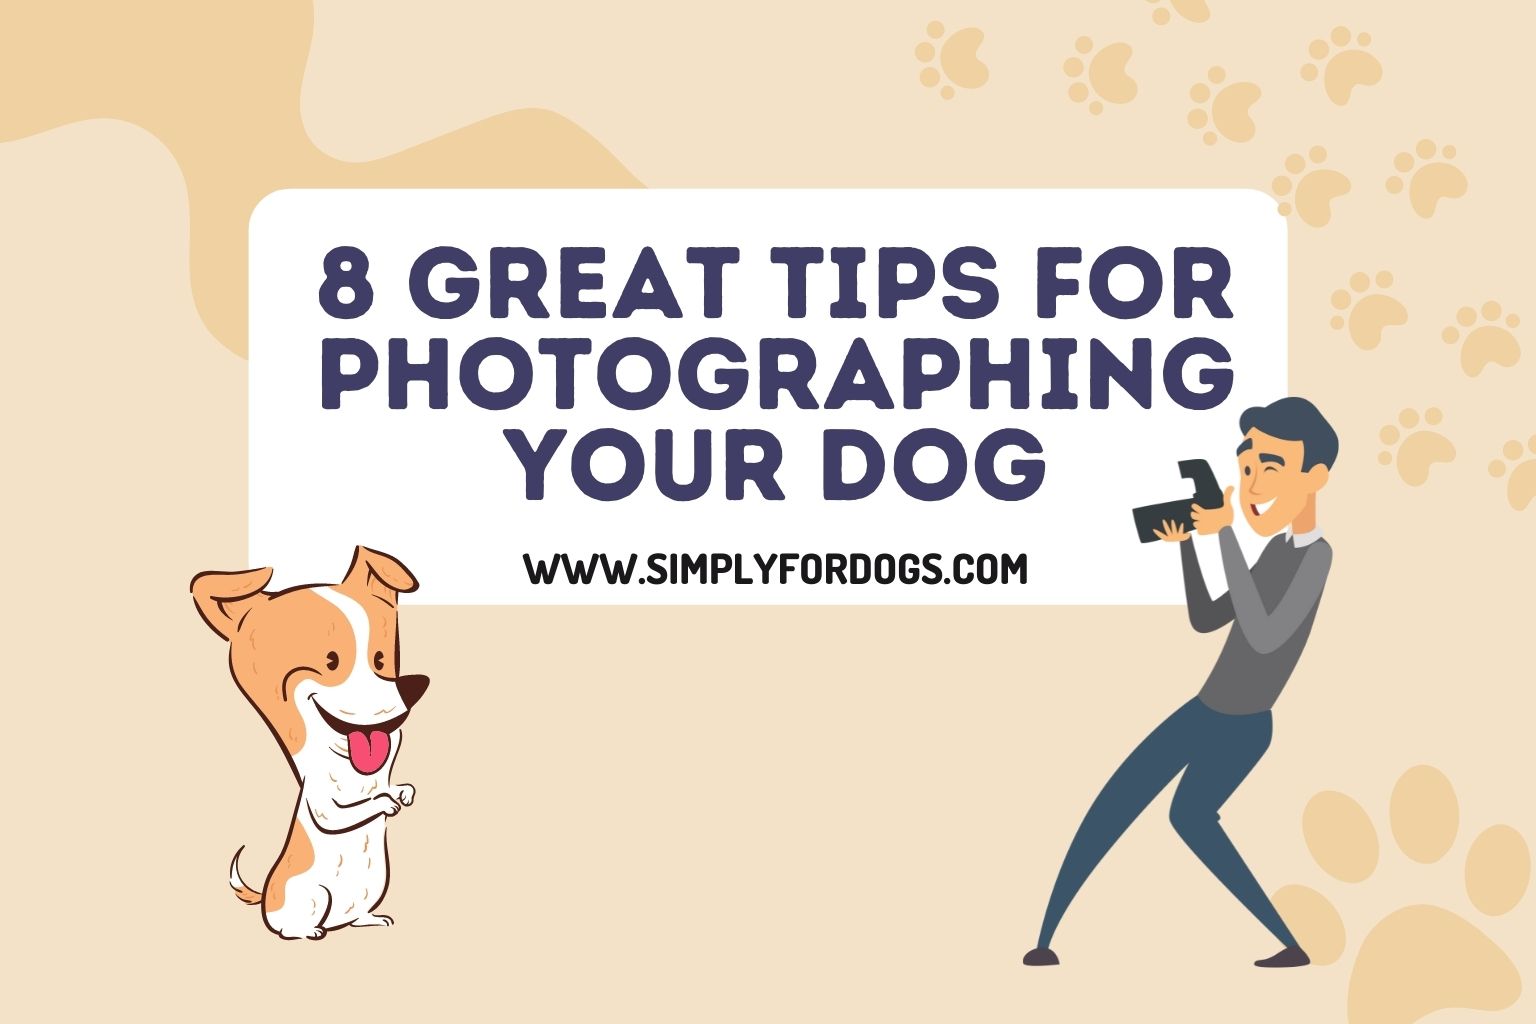 8 Great Tips for Photographing Your Dog